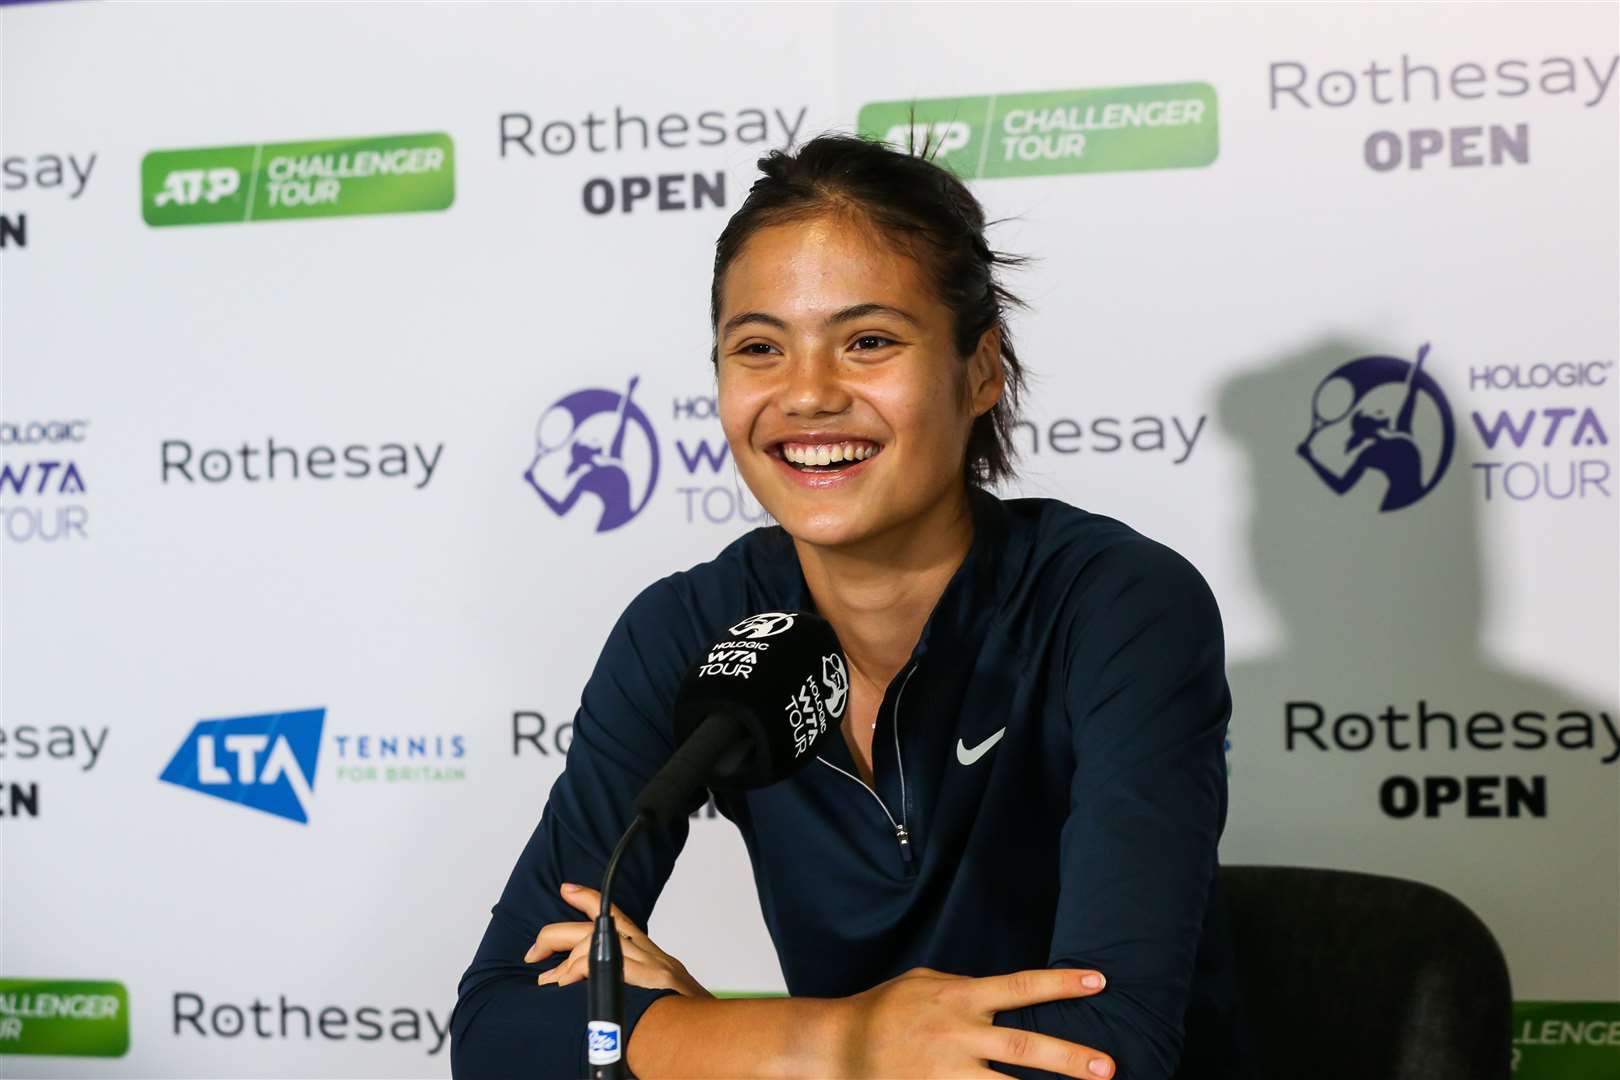 Emma Raducanu was glad to be back in the UK for her home Grand Slam - but her smiles didn’t last long after a second-round exit at Wimbledon. Picture: LTA/Getty Images